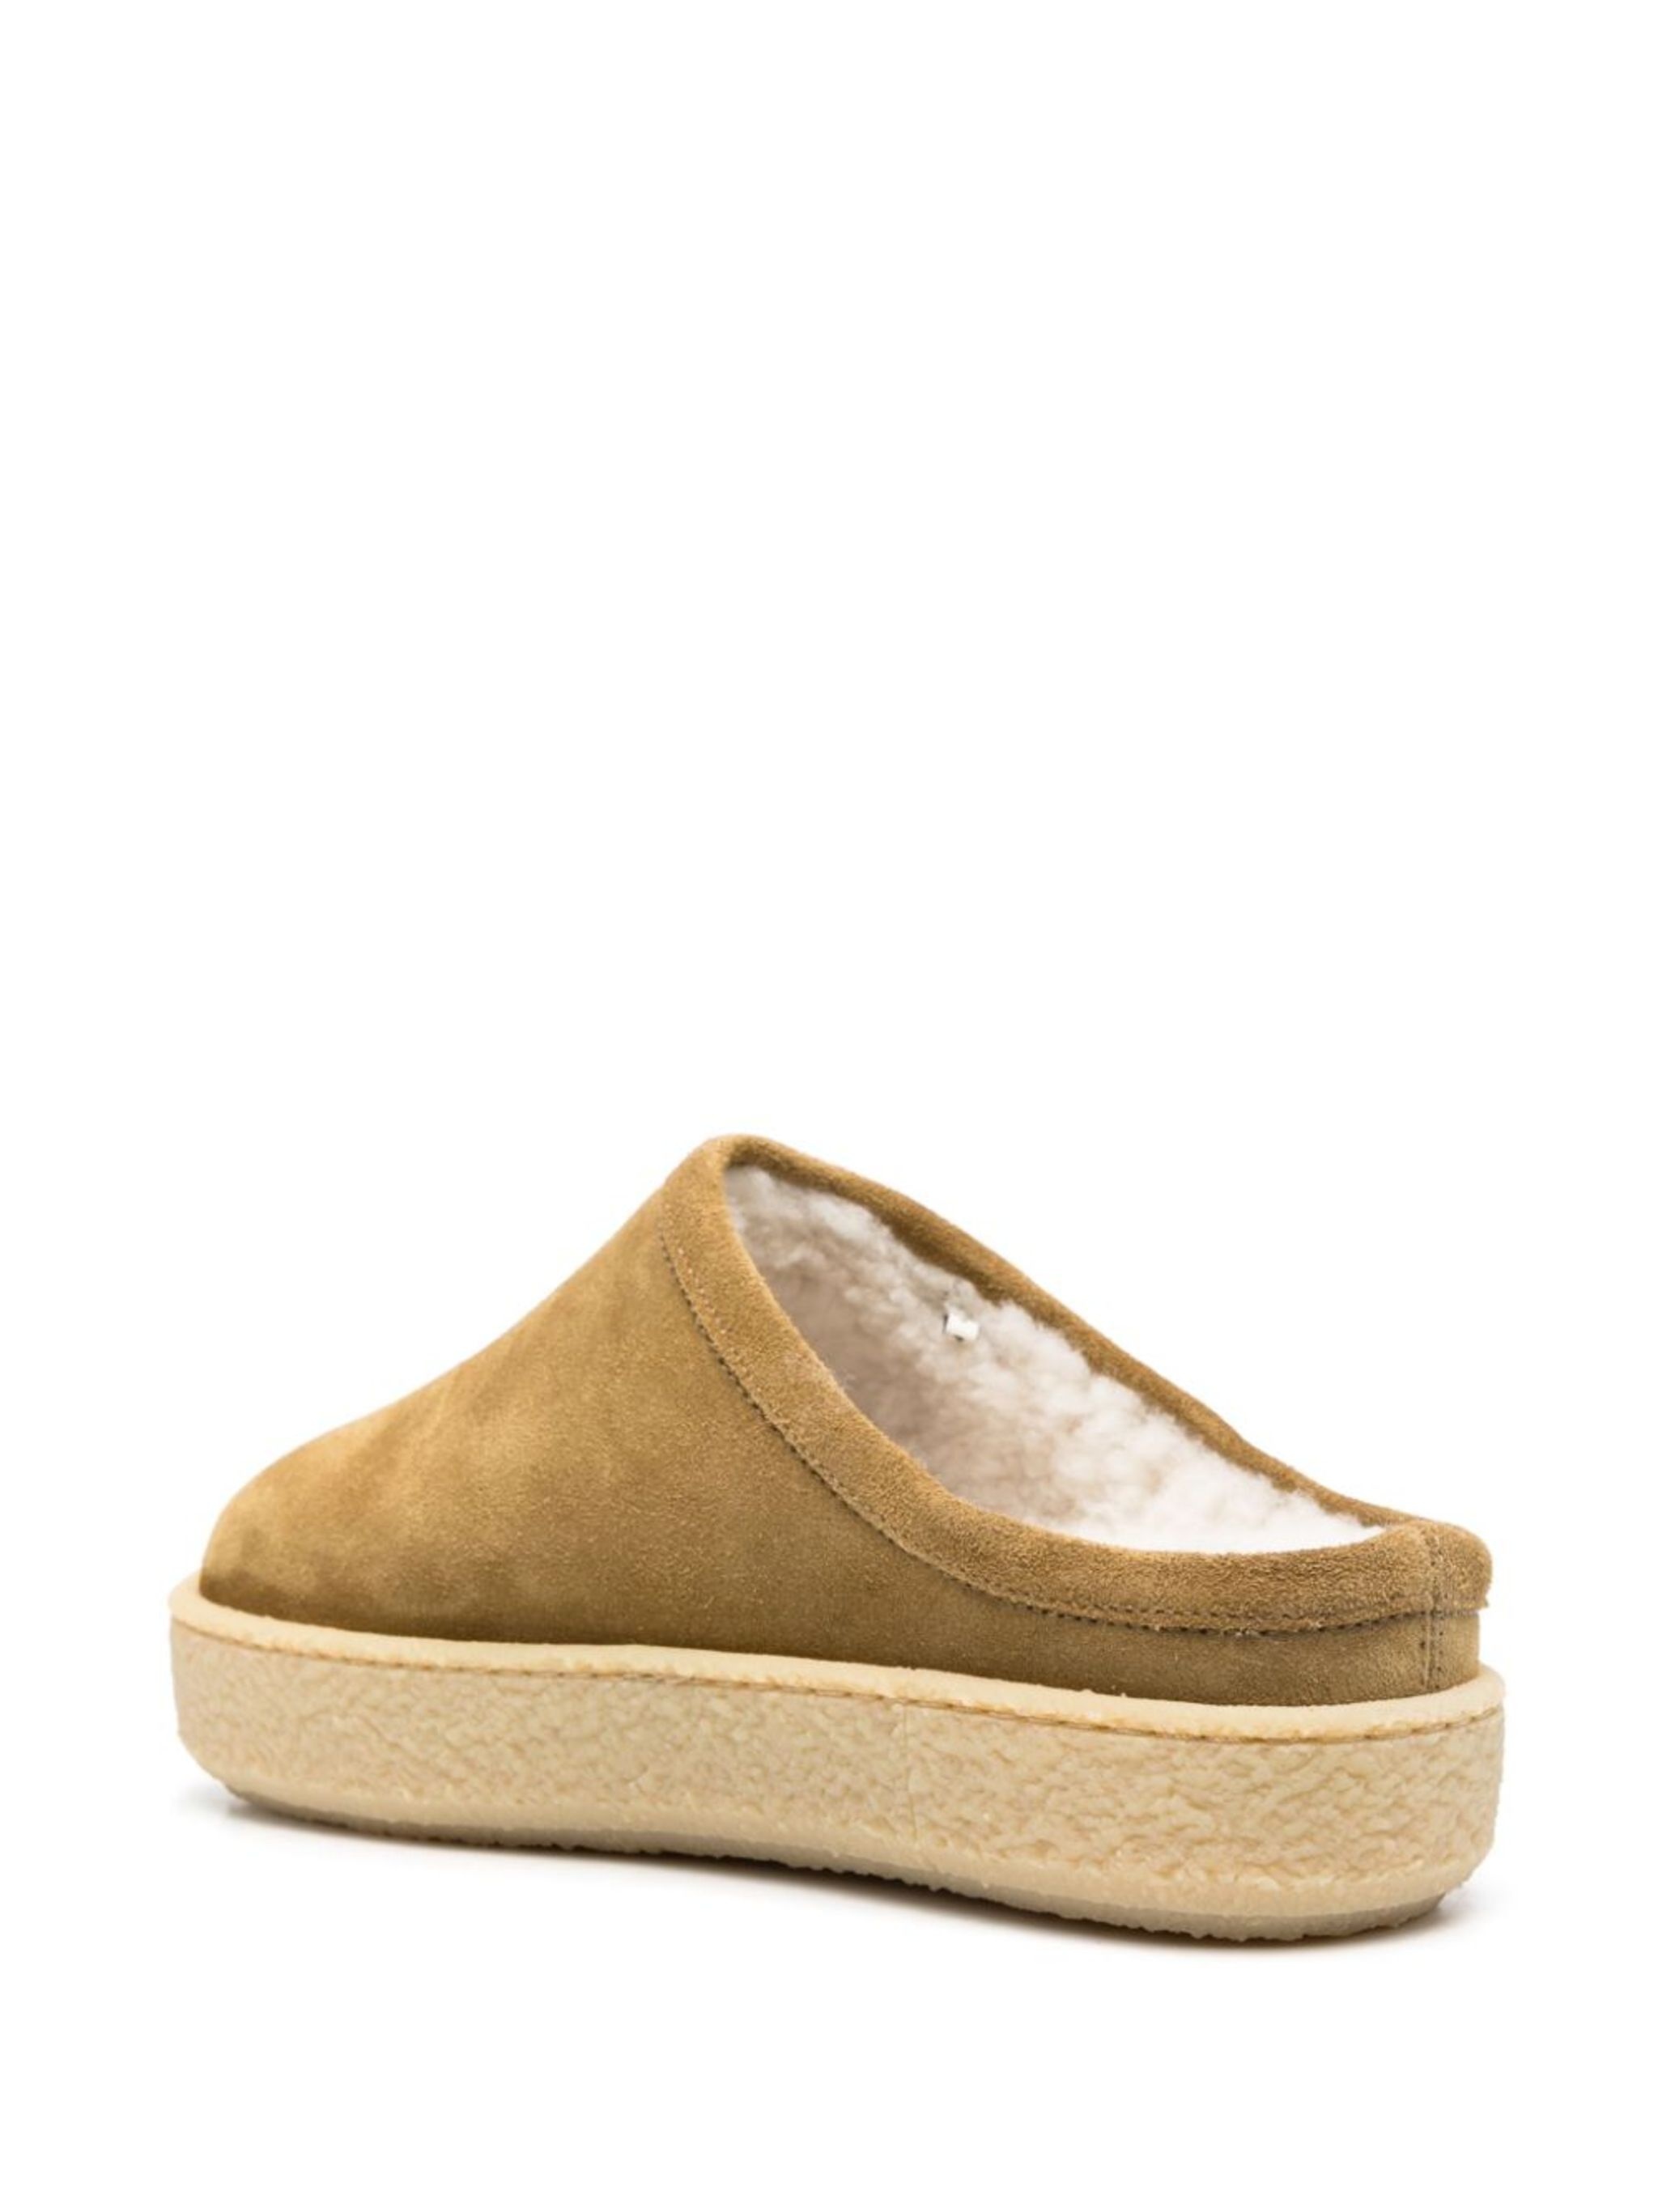 shearling suede mules - 3